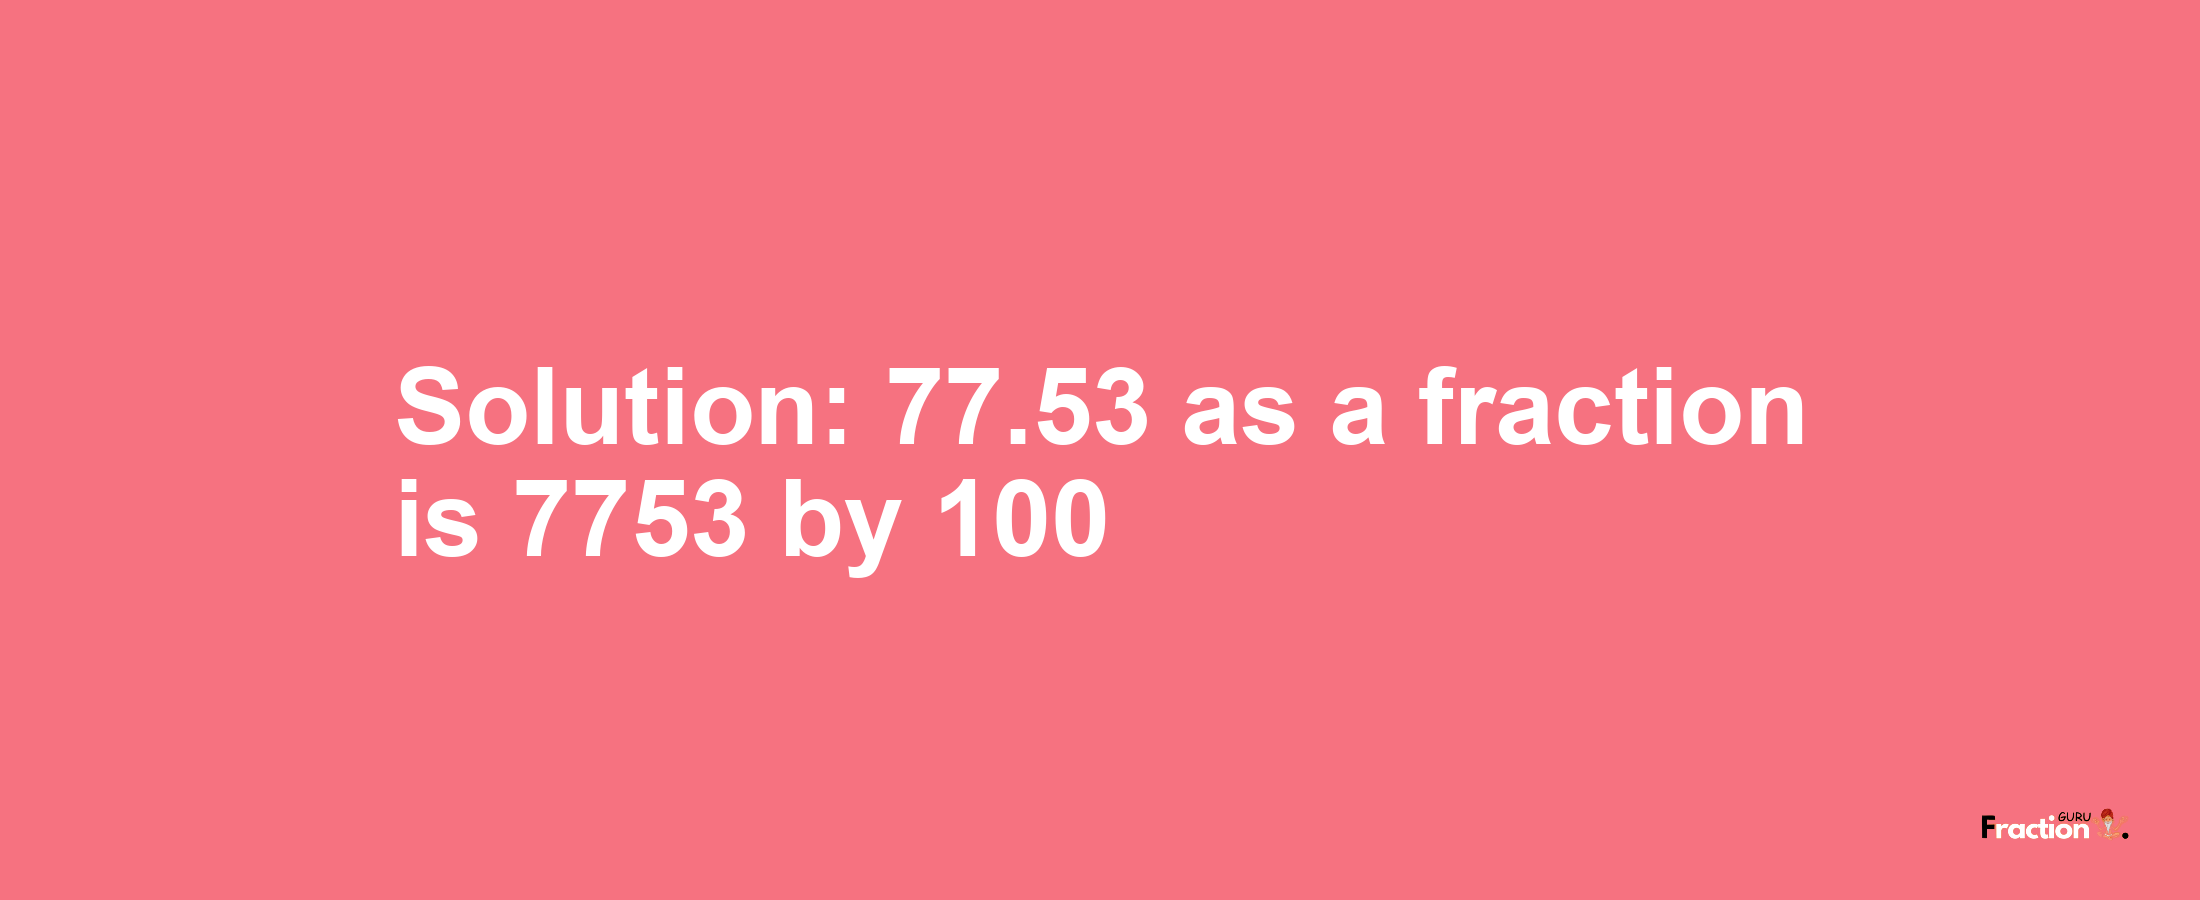 Solution:77.53 as a fraction is 7753/100